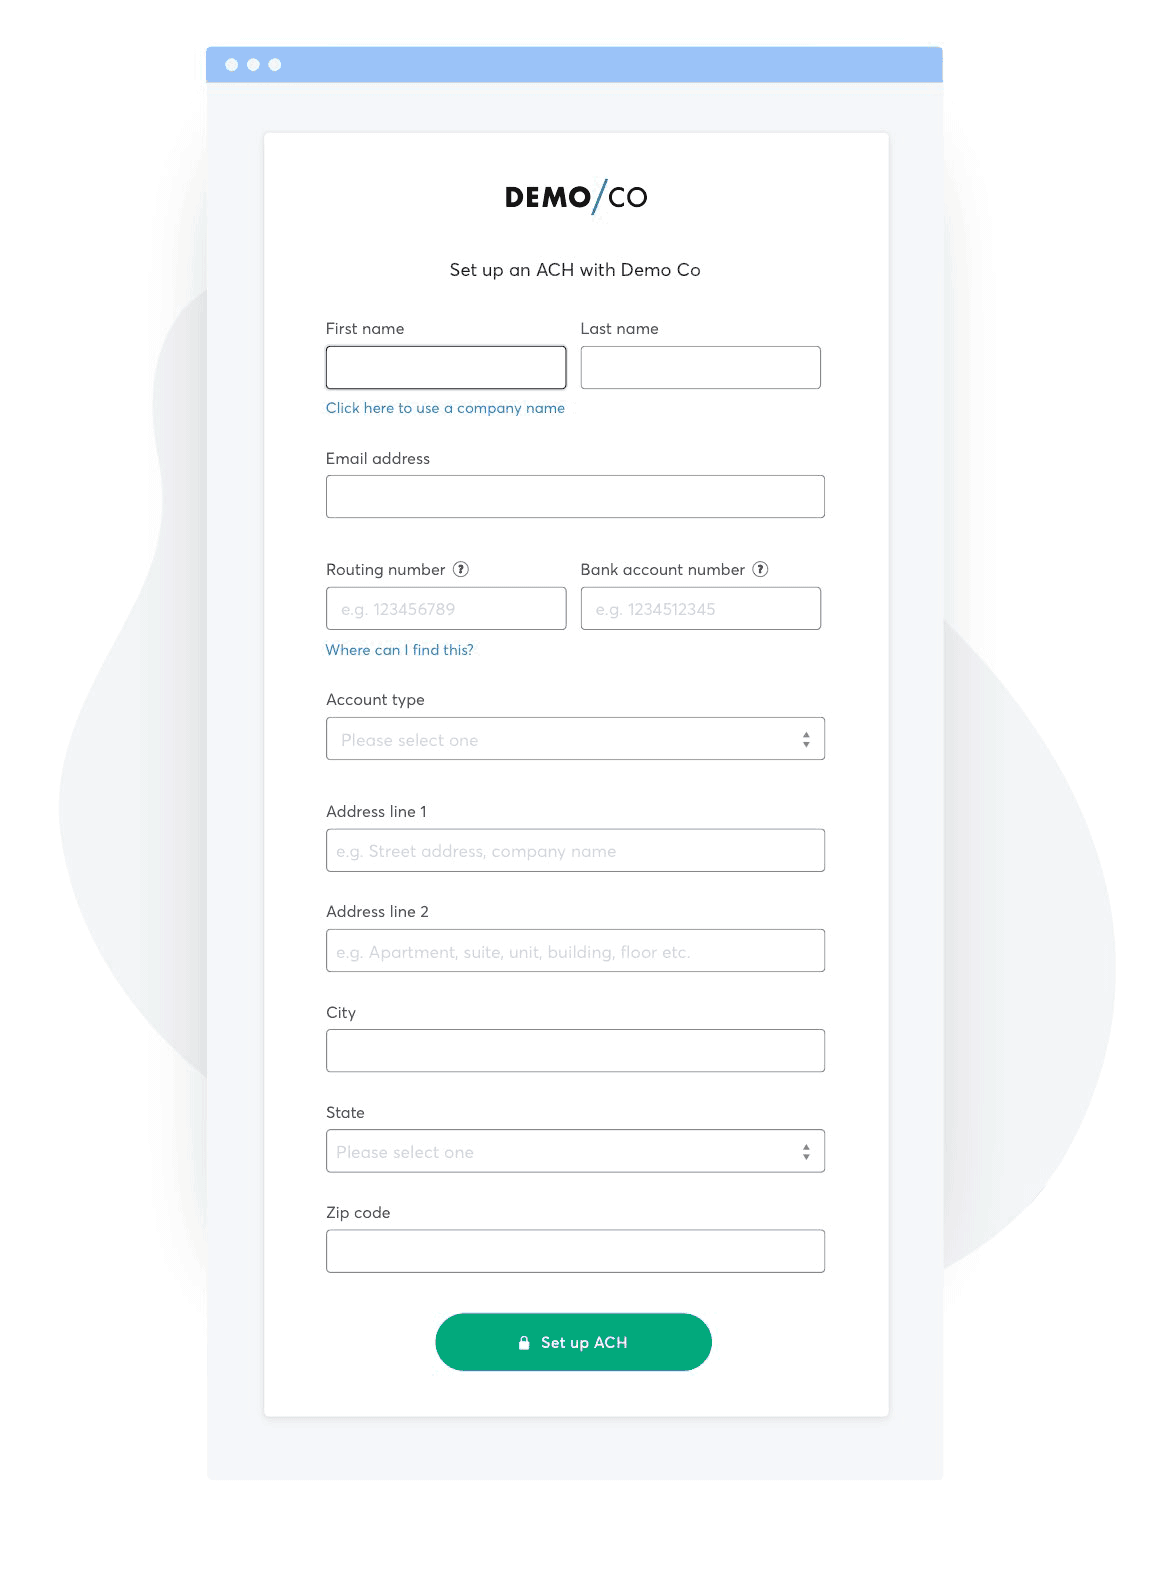 GoCardless signup screens - image provided by GoCardless